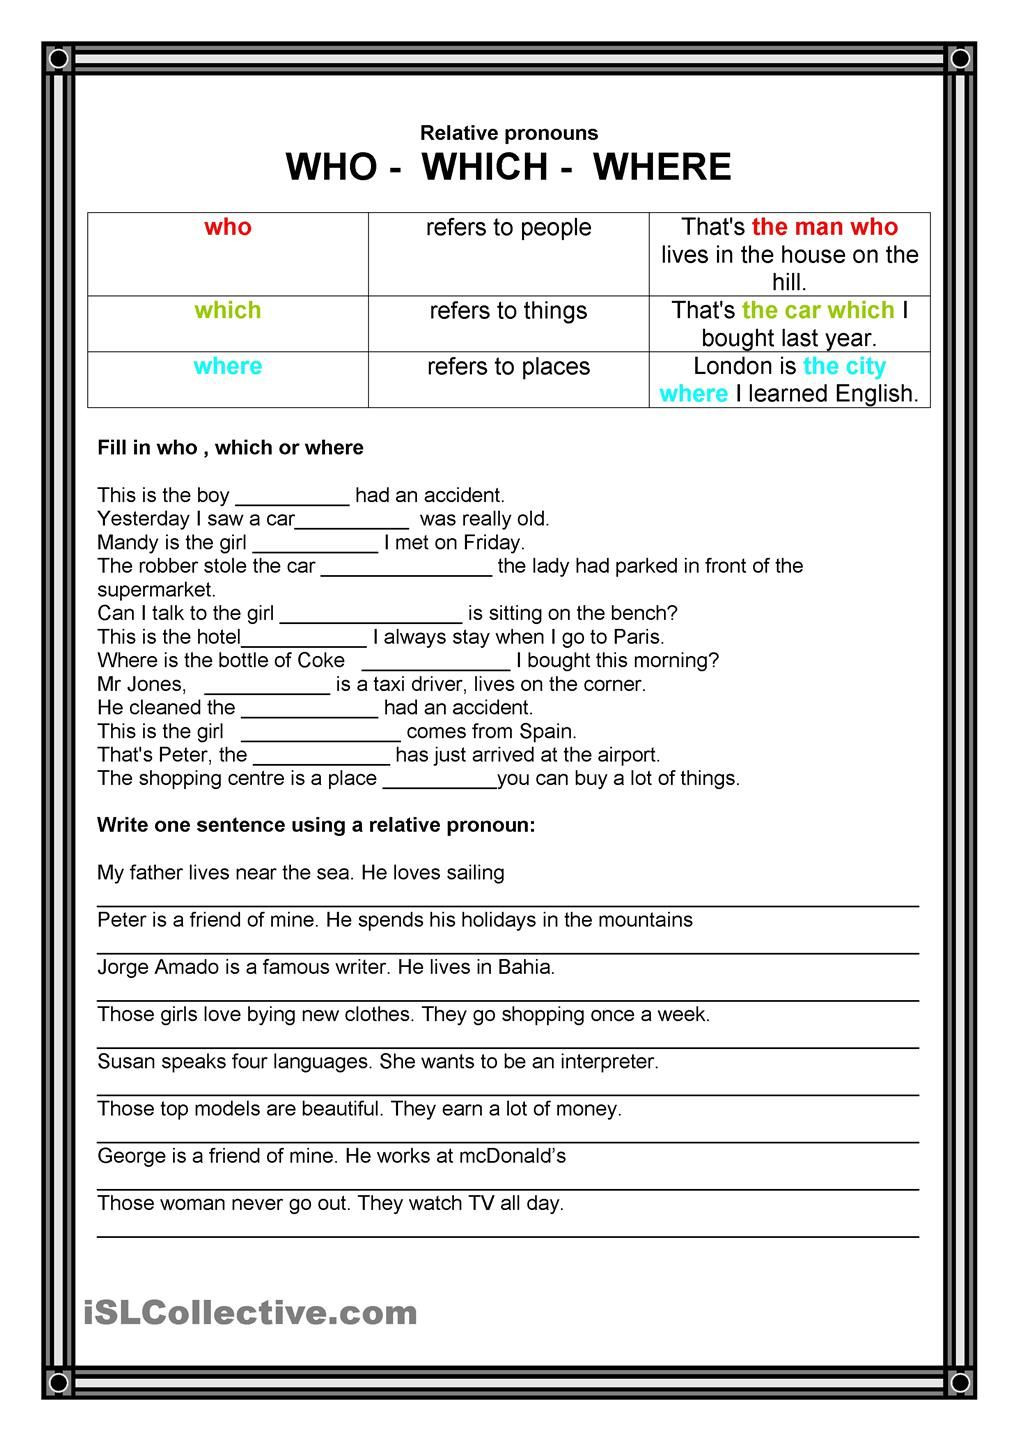 Relative Adverbs Worksheet 4th Grade Relative Pronouns who which where